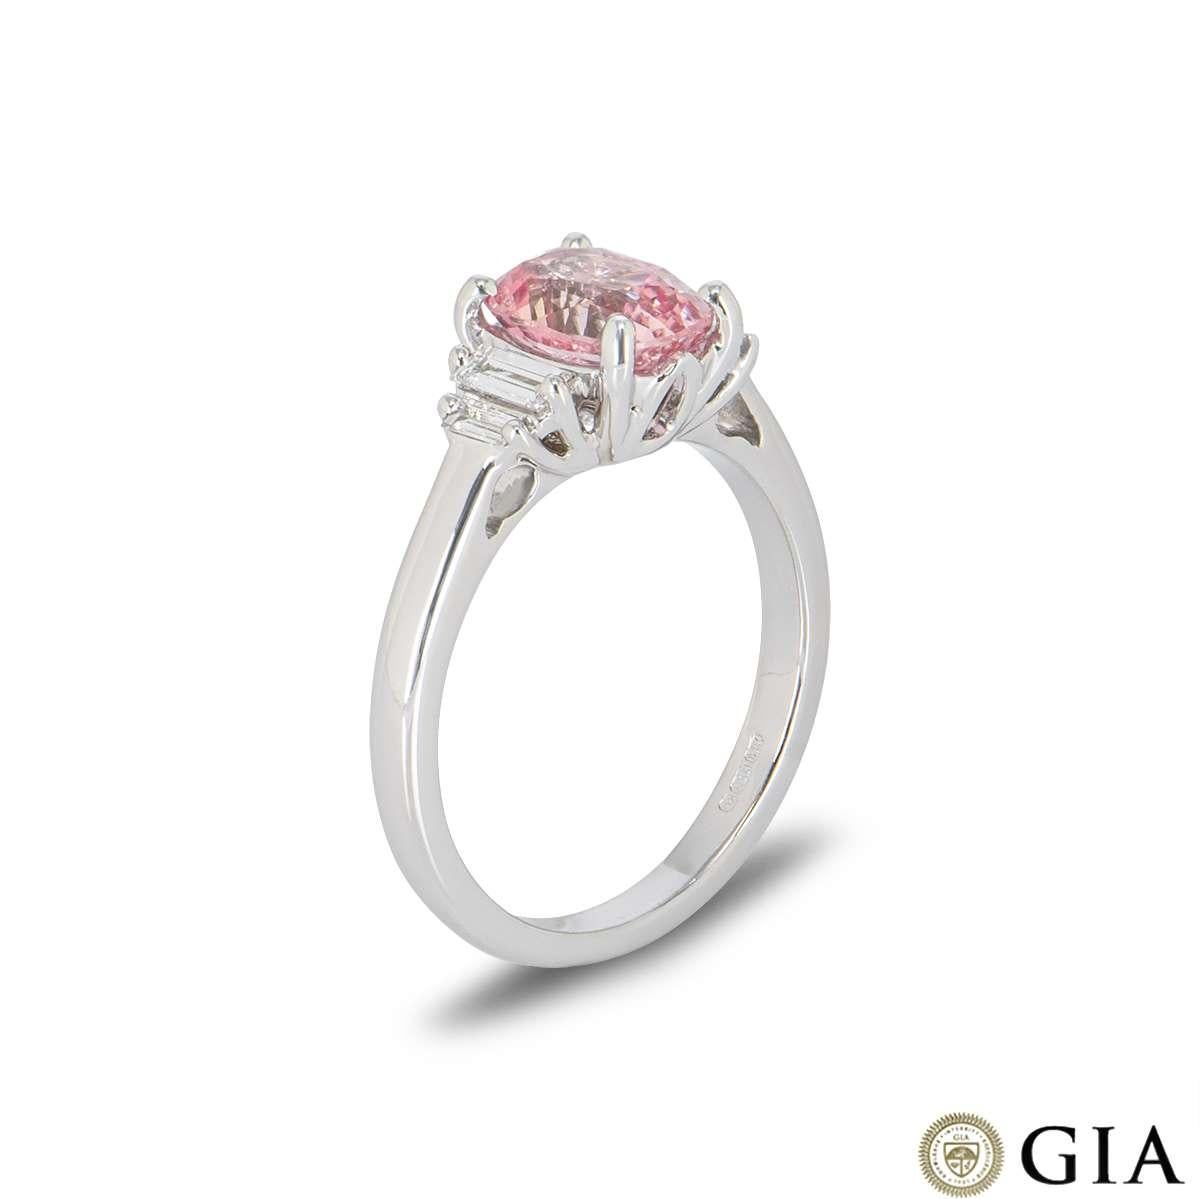 A beautiful 18k white gold pink sapphire and diamond ring. The Padparasha pink cushion cut sapphire weighs 1.86ct and displays an orange-pink colour. Set to either side of the sapphire are 4 baguette cut diamonds with a total weight of 0.23ct. The